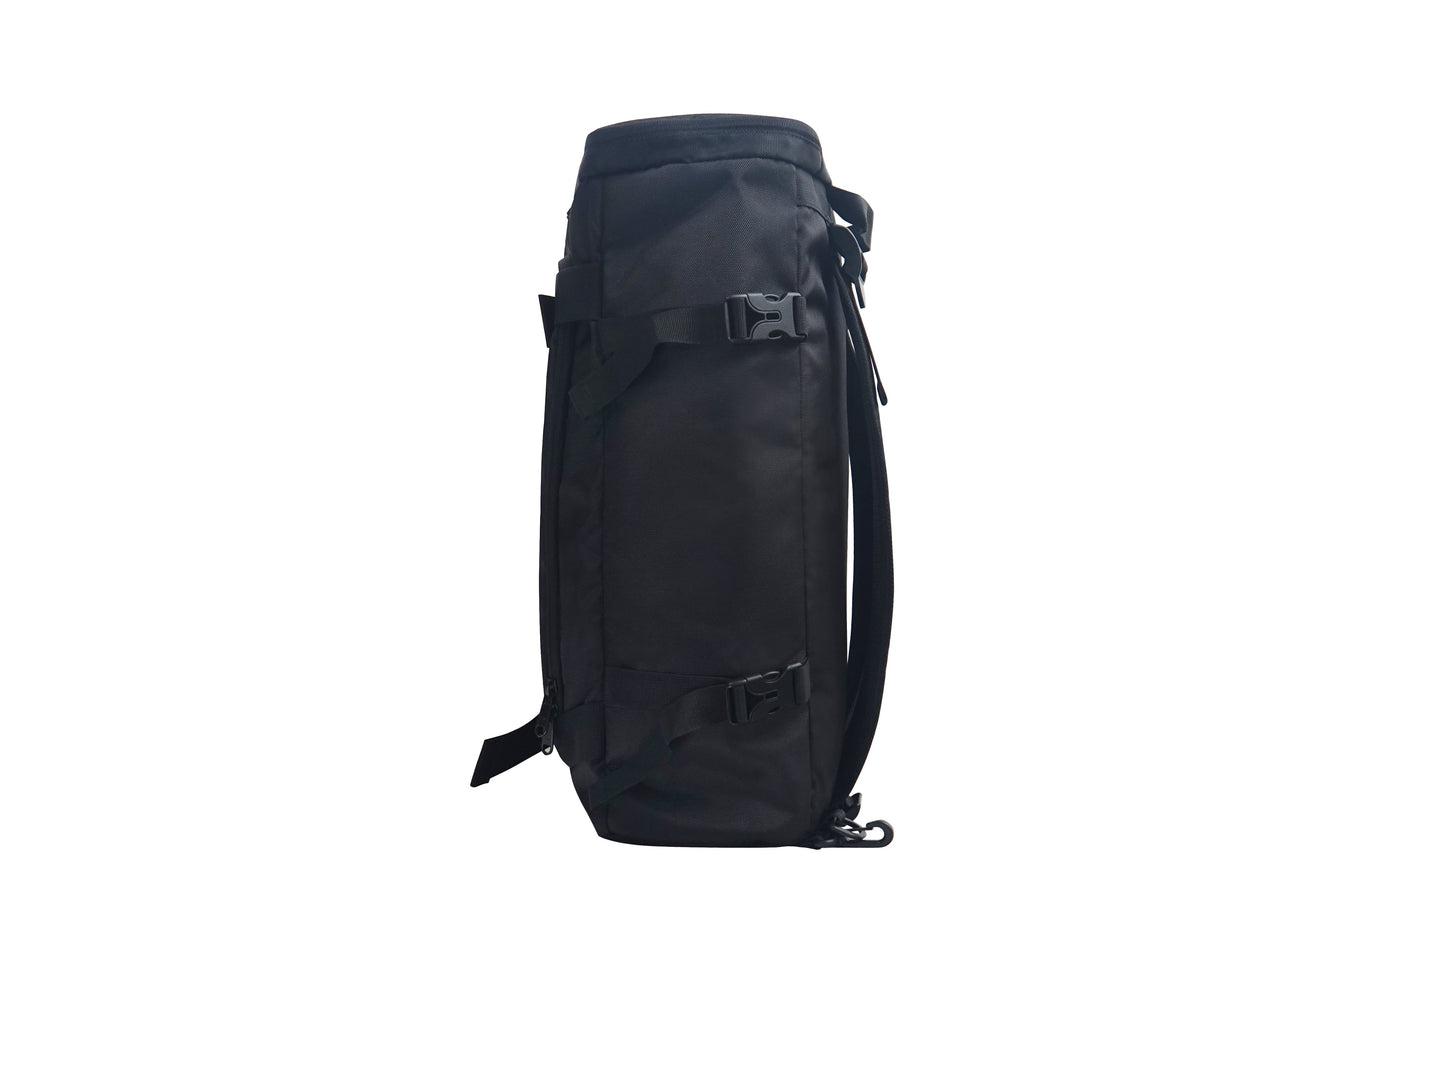 Bicester HC - Accra Backpack - Black